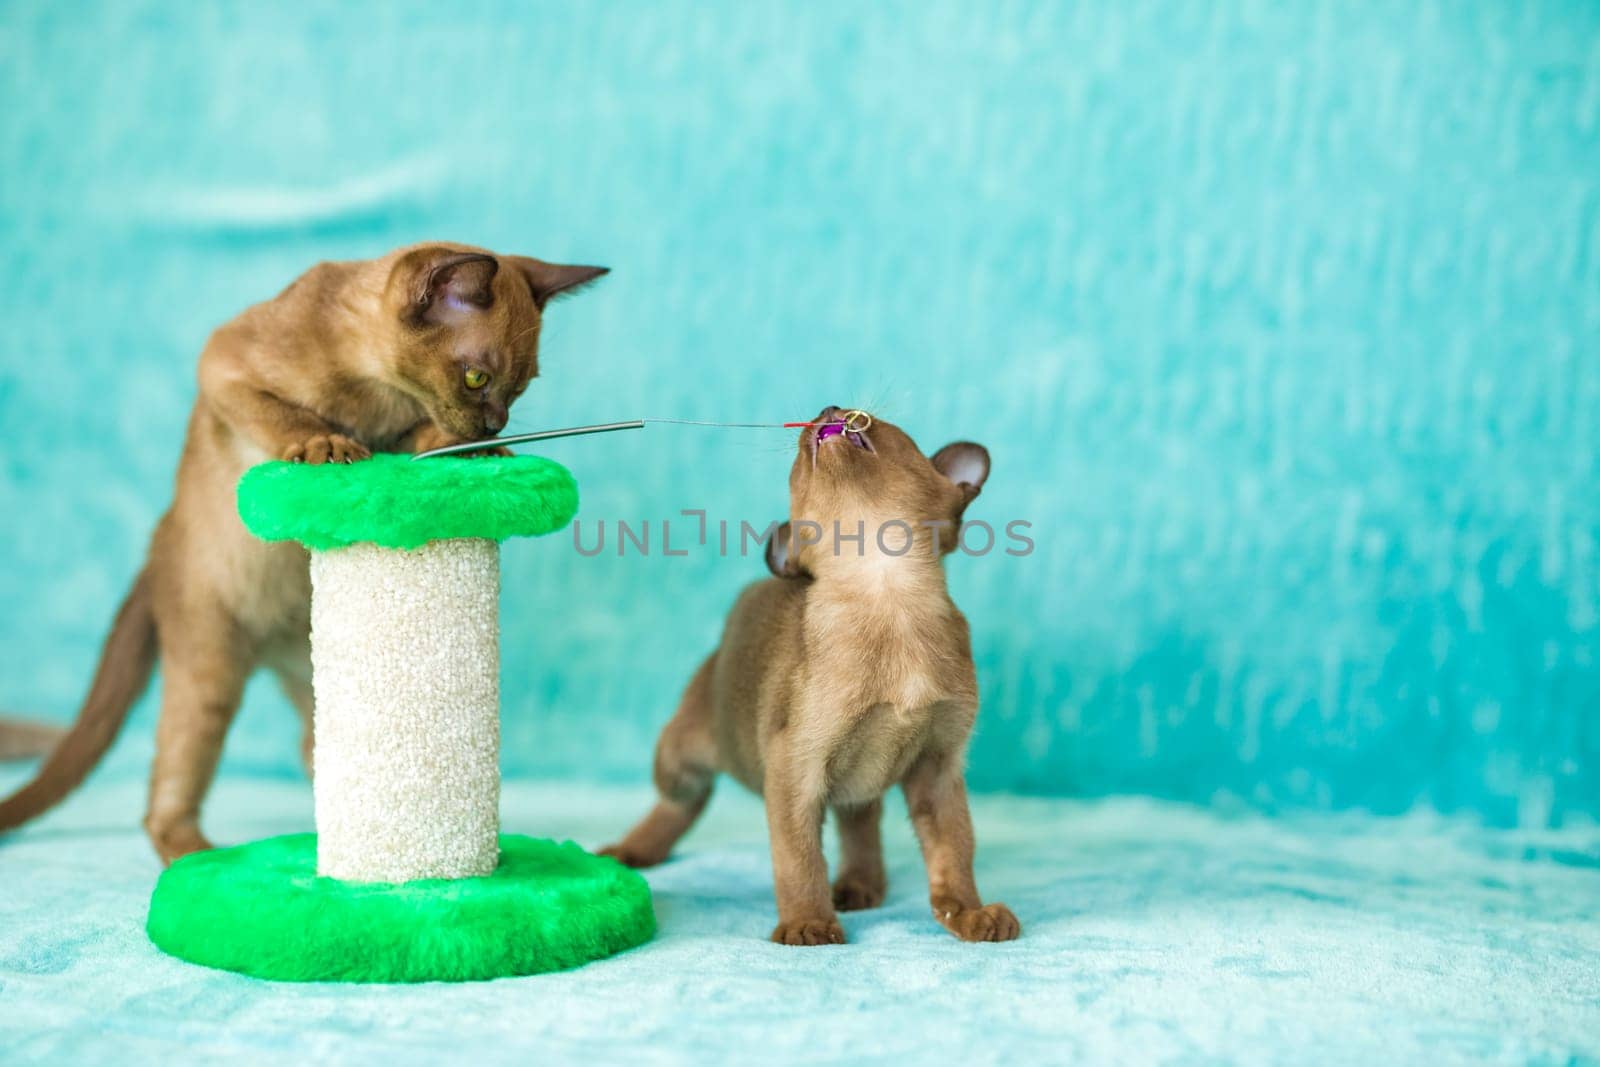 Young domestic kittens of Burmese breed, brown, play with a toy on a stand in a city apartment building. Natural habitat. by Alina_Lebed